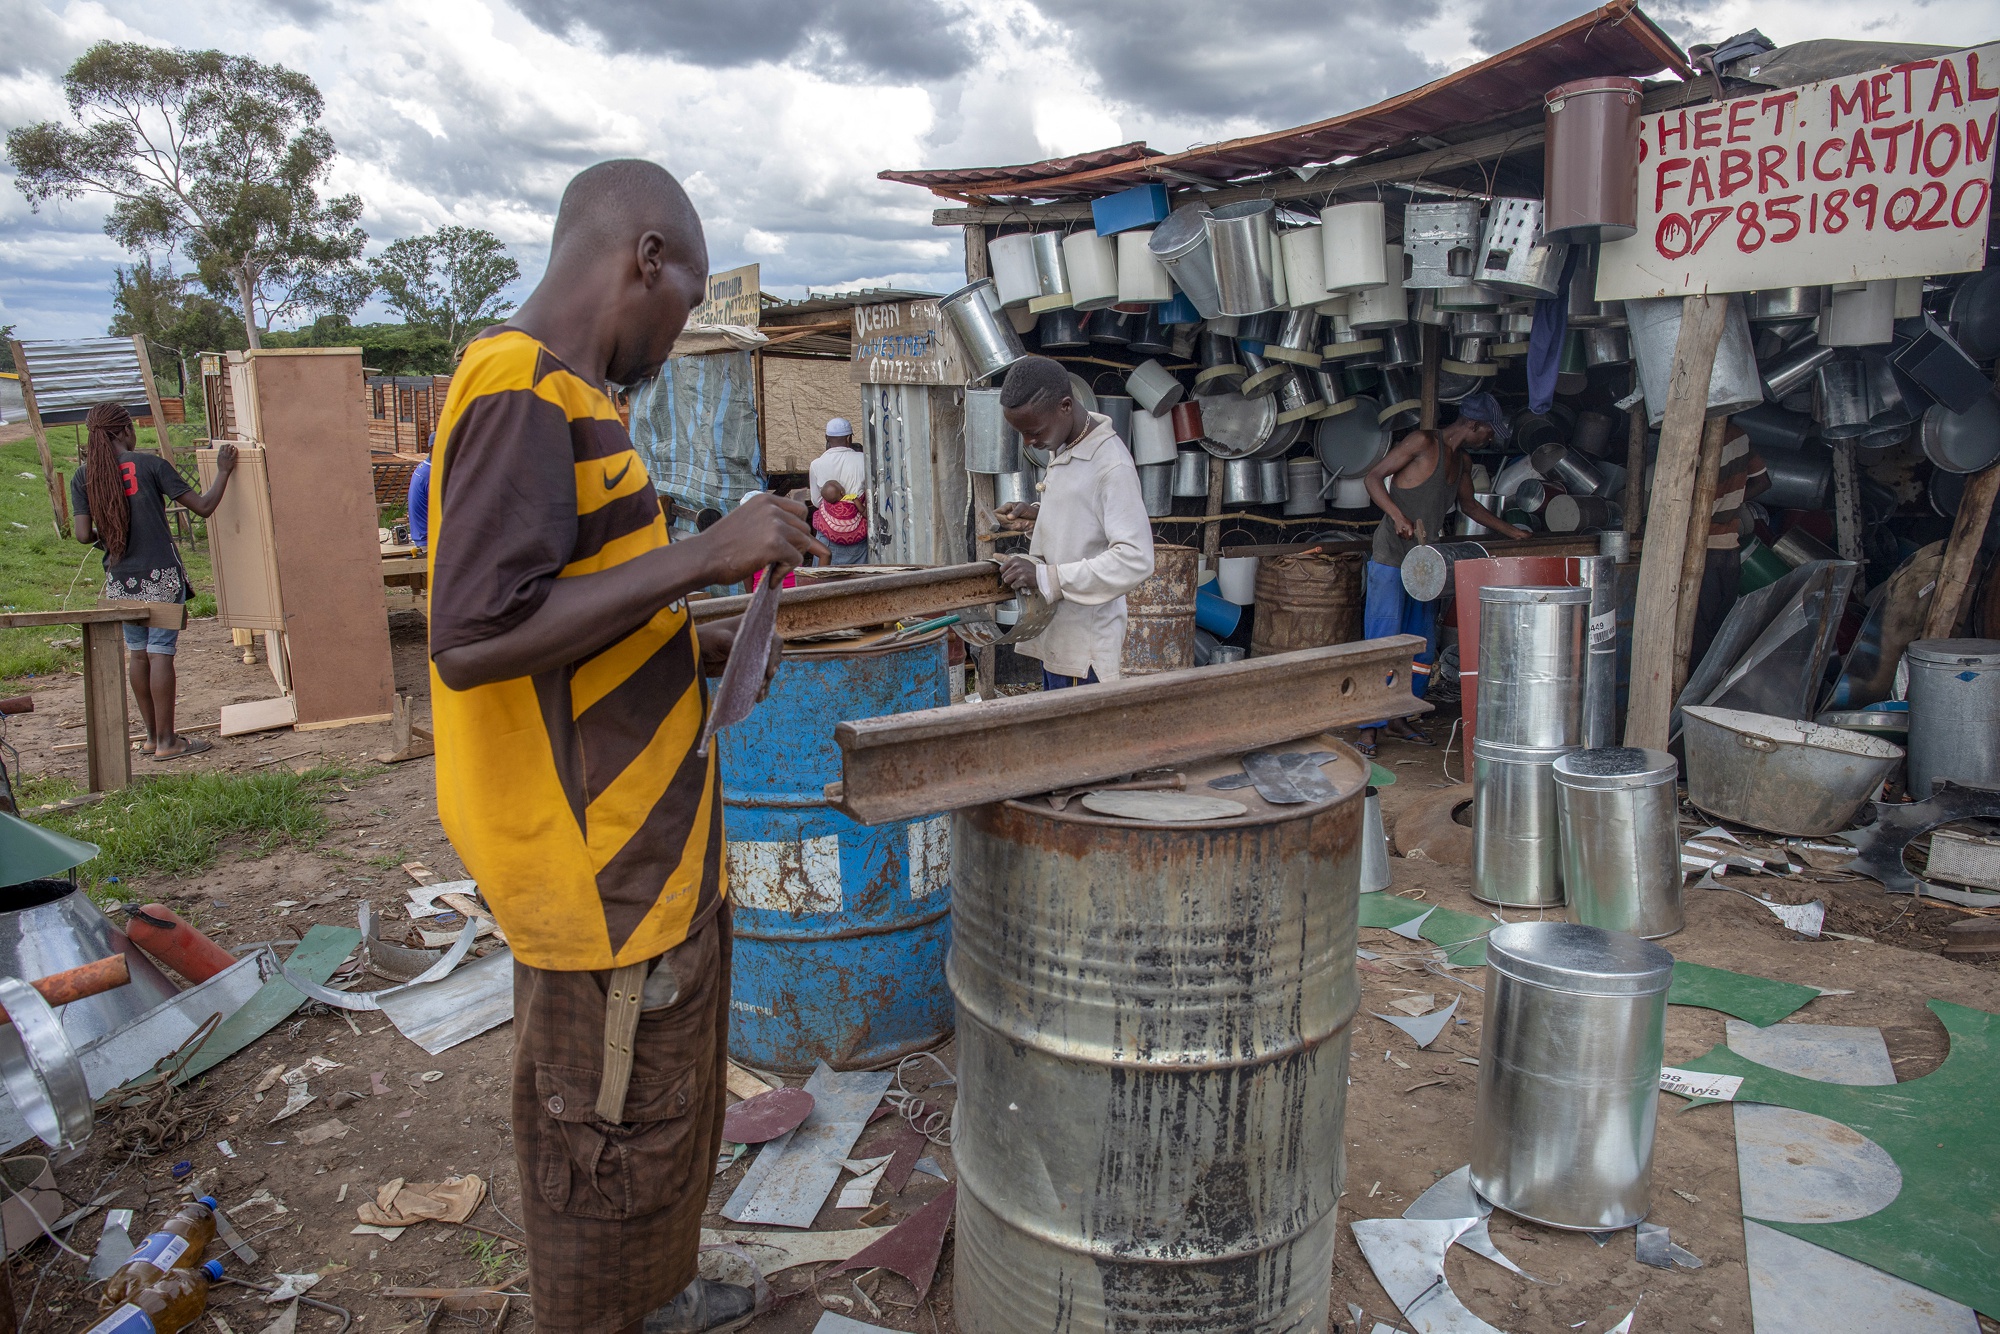 Workers prepare pieces of metal for resale at a scrap and sheet metal stall in Harare, Zimbabwe.